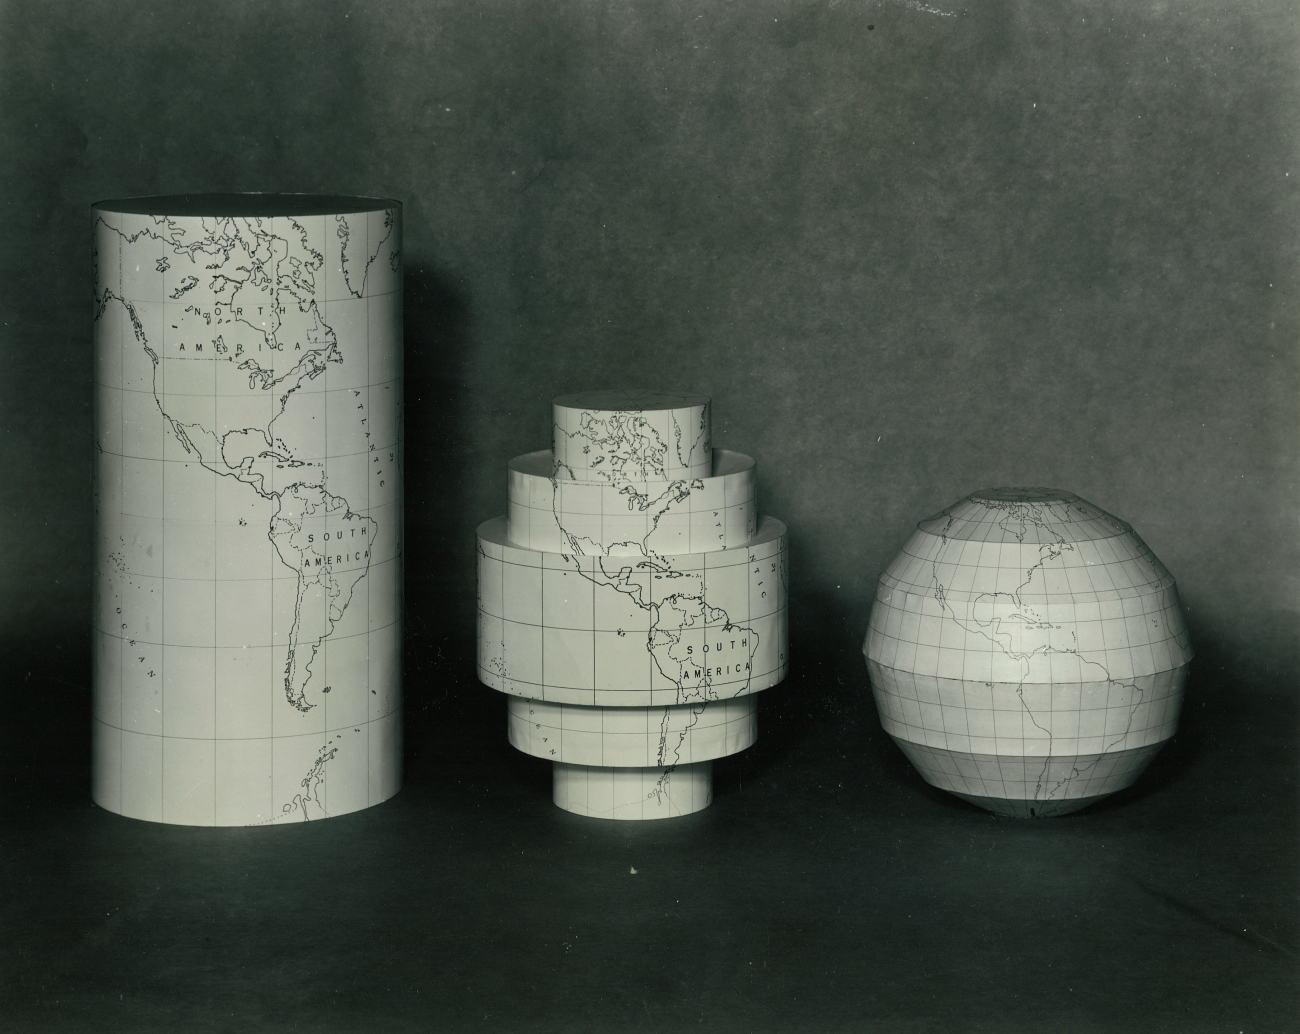 Models of various projections studied for designing the worldwide aeronauticalchart system